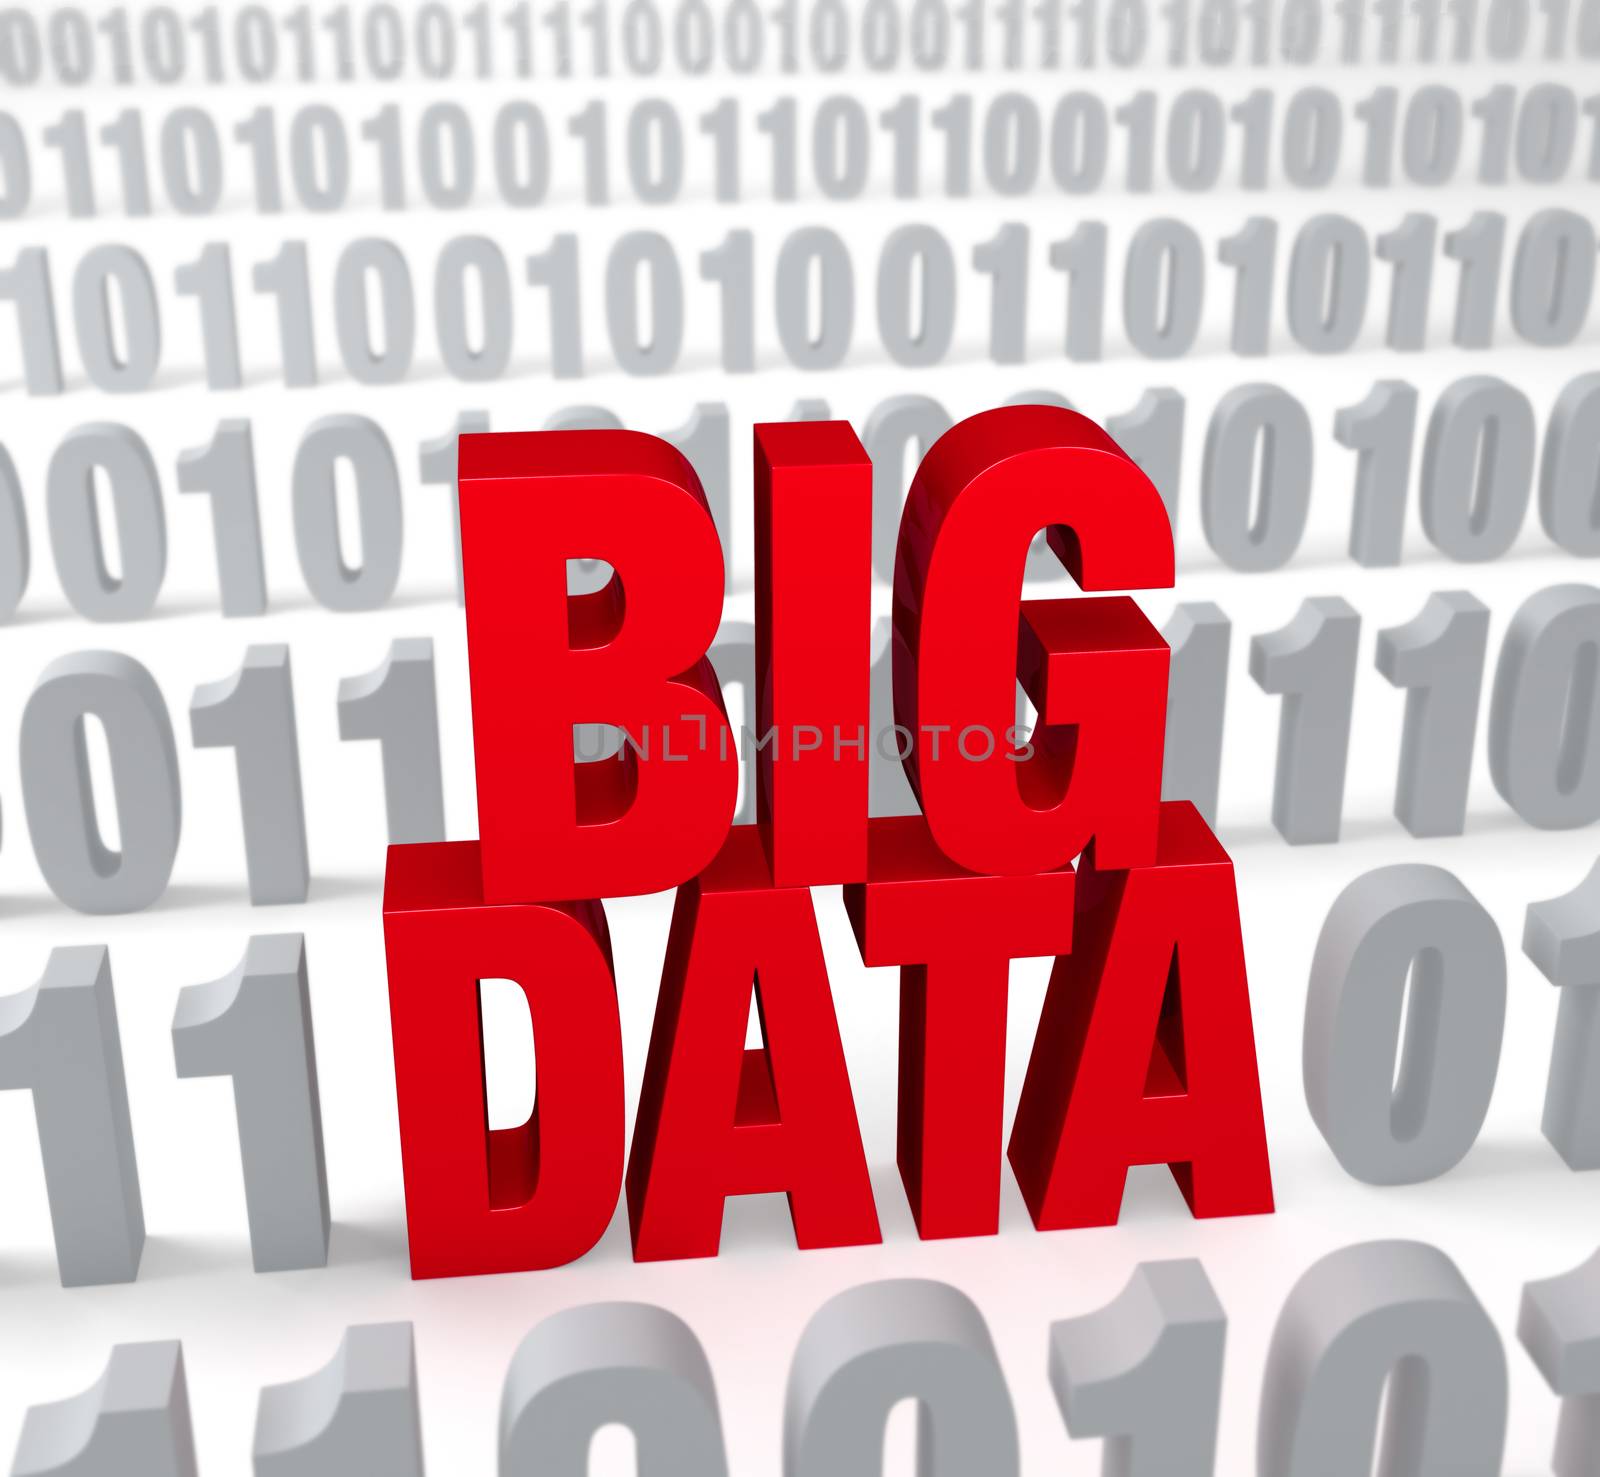 Big Data In The Numbers by Em3